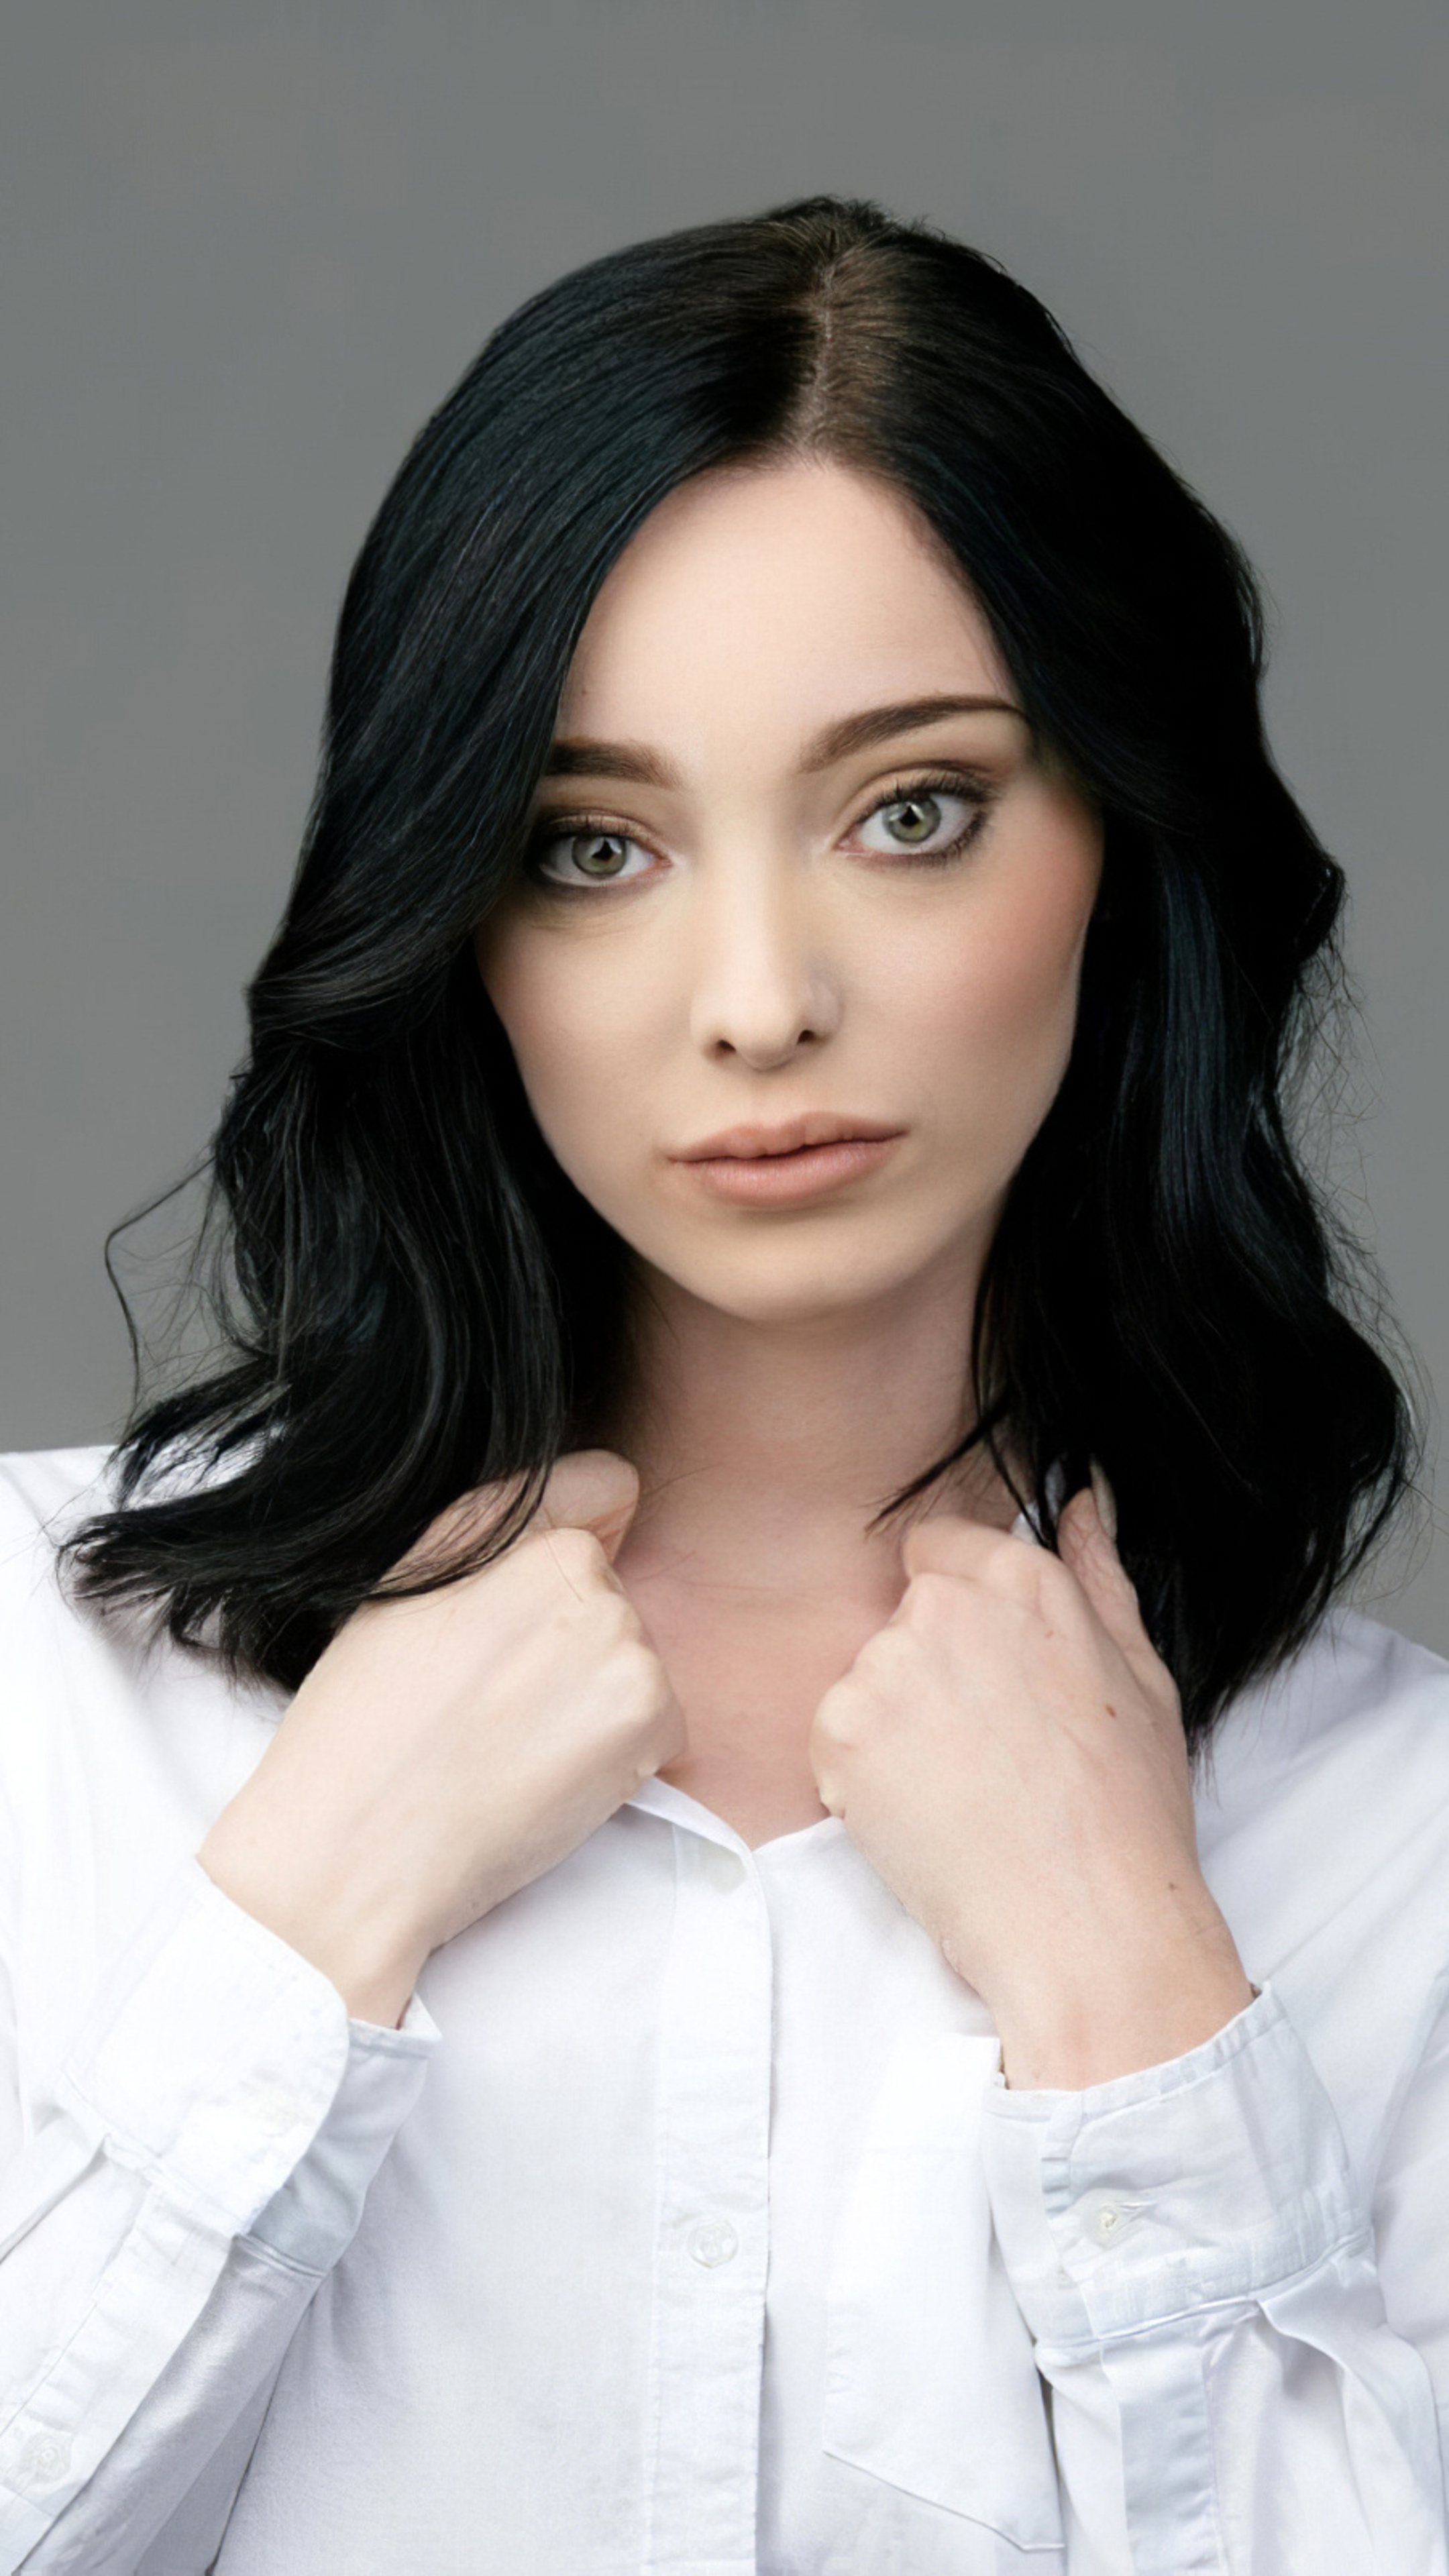 Emma Dumont 2019 Latest Sony Xperia X, XZ, Z5 Premium HD 4k Wallpapers, Images, Backgrounds, Photos and Pictures 2160x3840